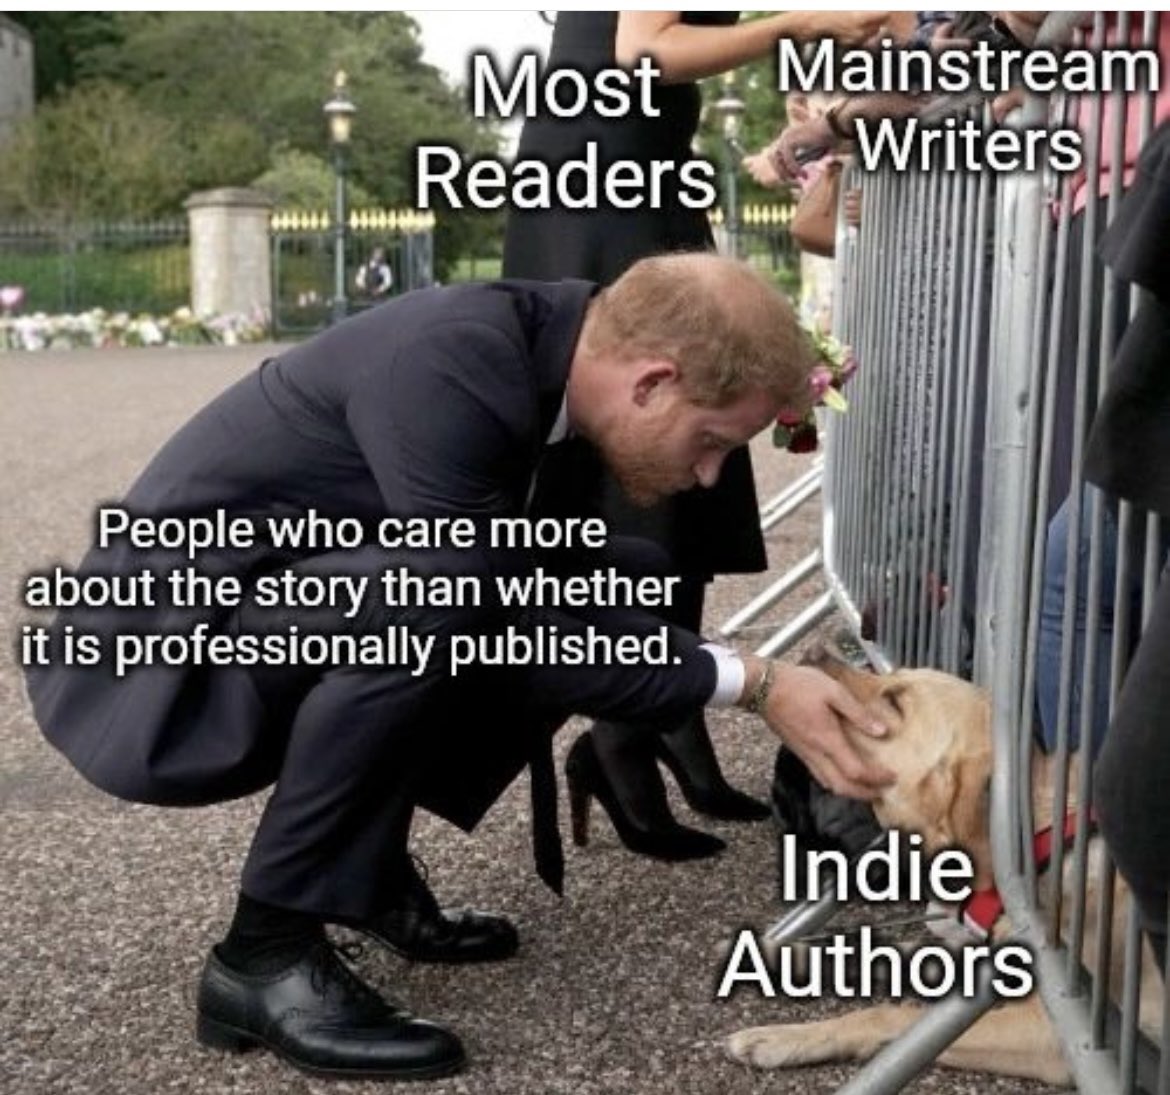 Shamelessly nicked this from instagram.

I’m looking at you Mr @MPell2137 👊😎

#booktalk #indie #author #selfpublishing #writing